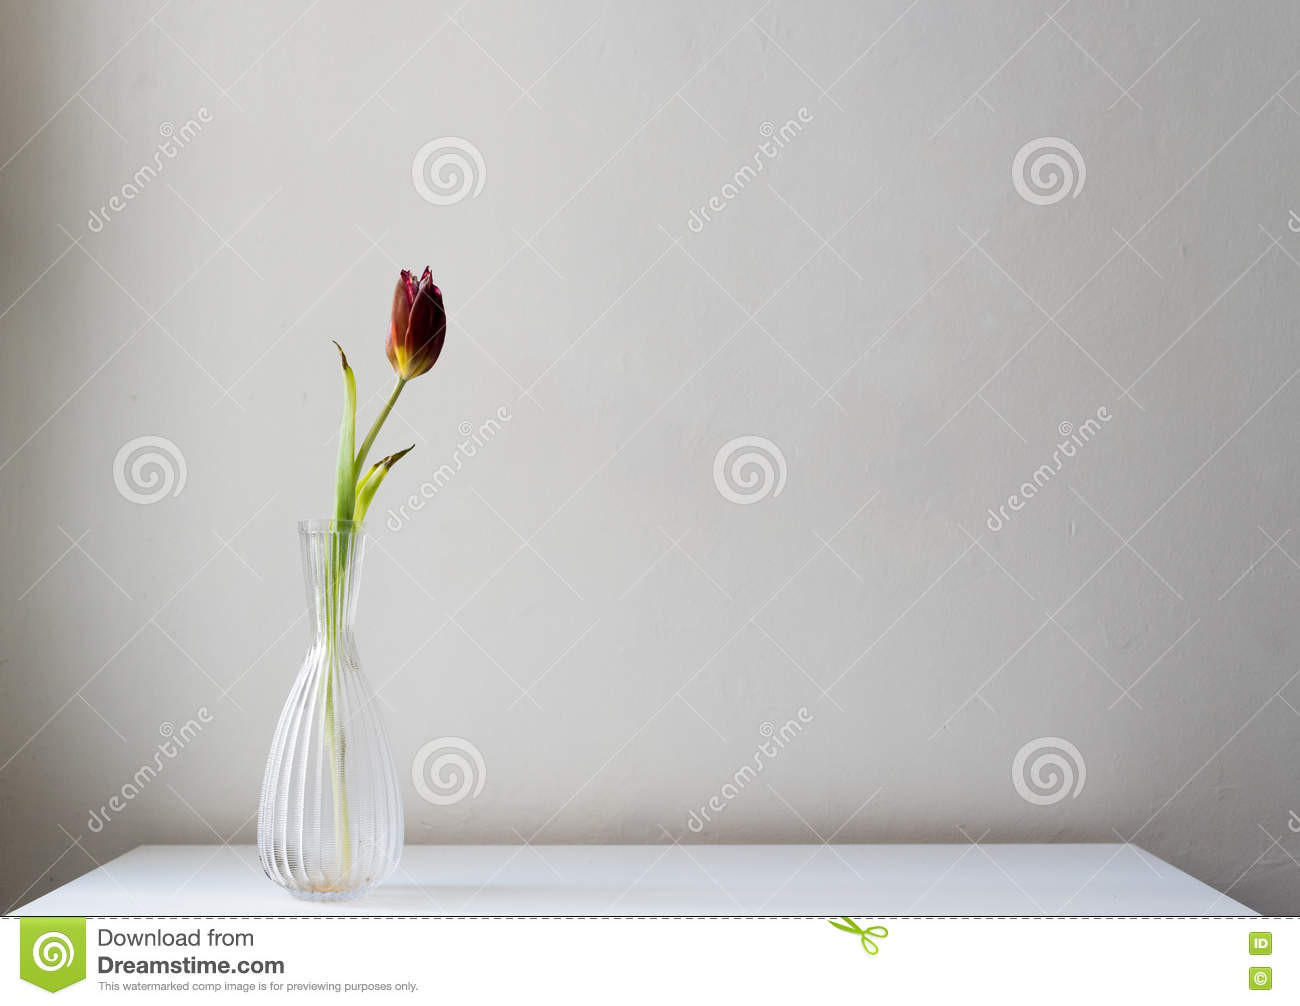 13 Popular White Glass Bowl Vase 2024 free download white glass bowl vase of dying dark red tulip in glass vase stock image image of neutral pertaining to dying dark red tulip in glass vase on white table against neutral wall